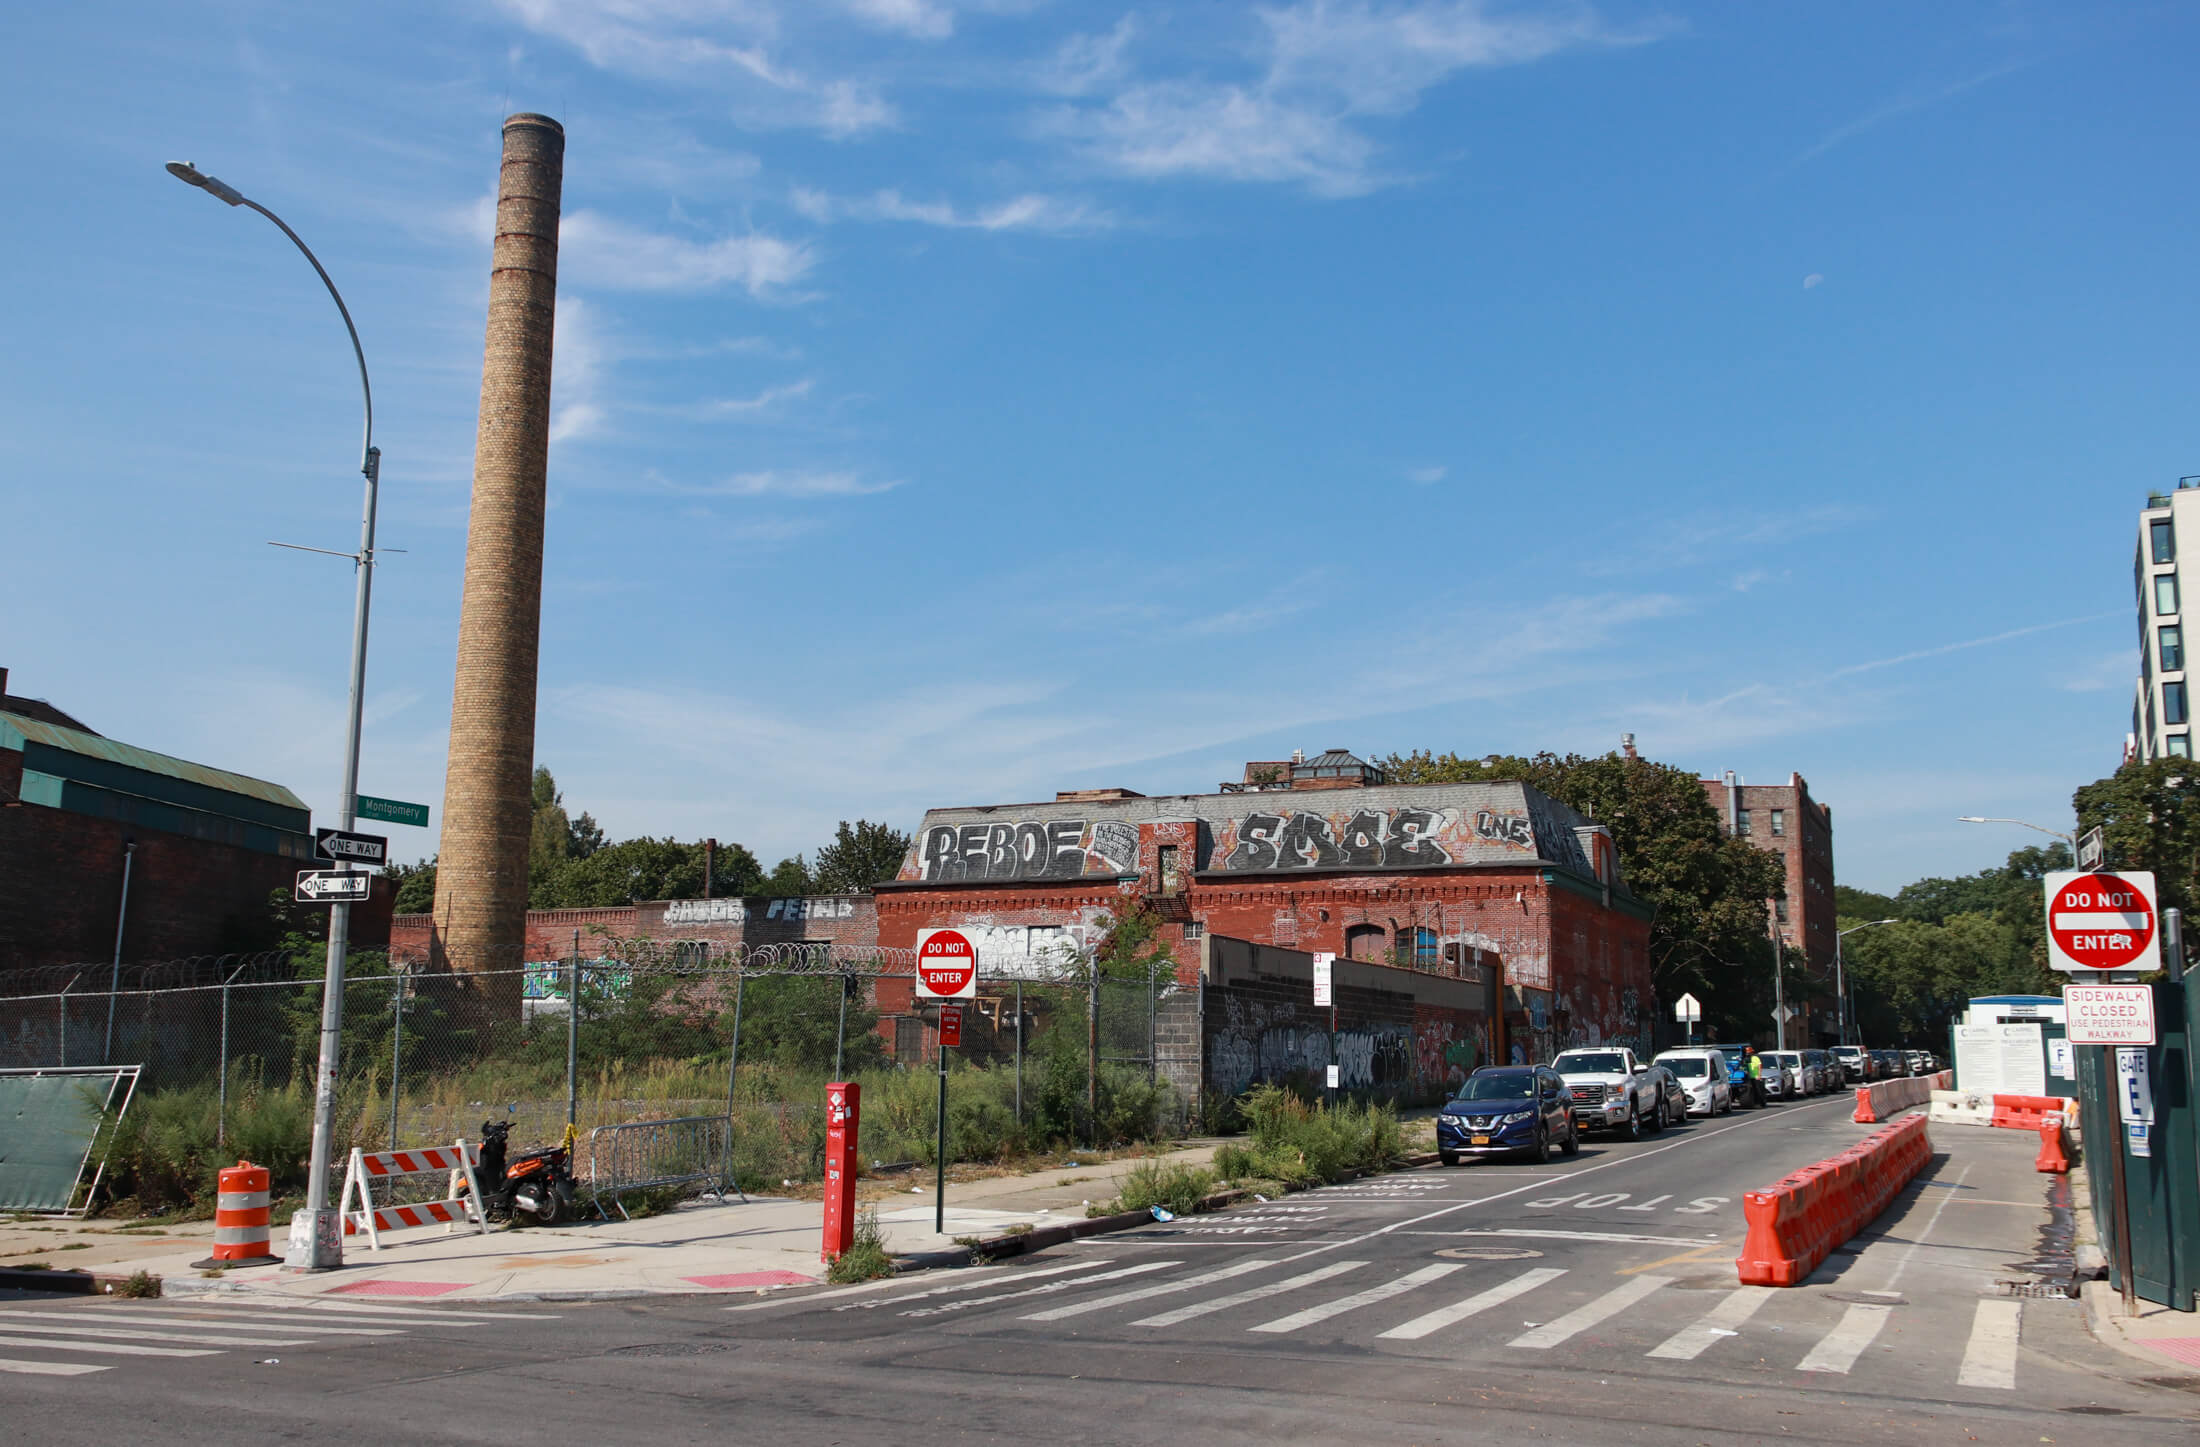 view on montgomery street showing the smokestack and a mansard roofed factory building